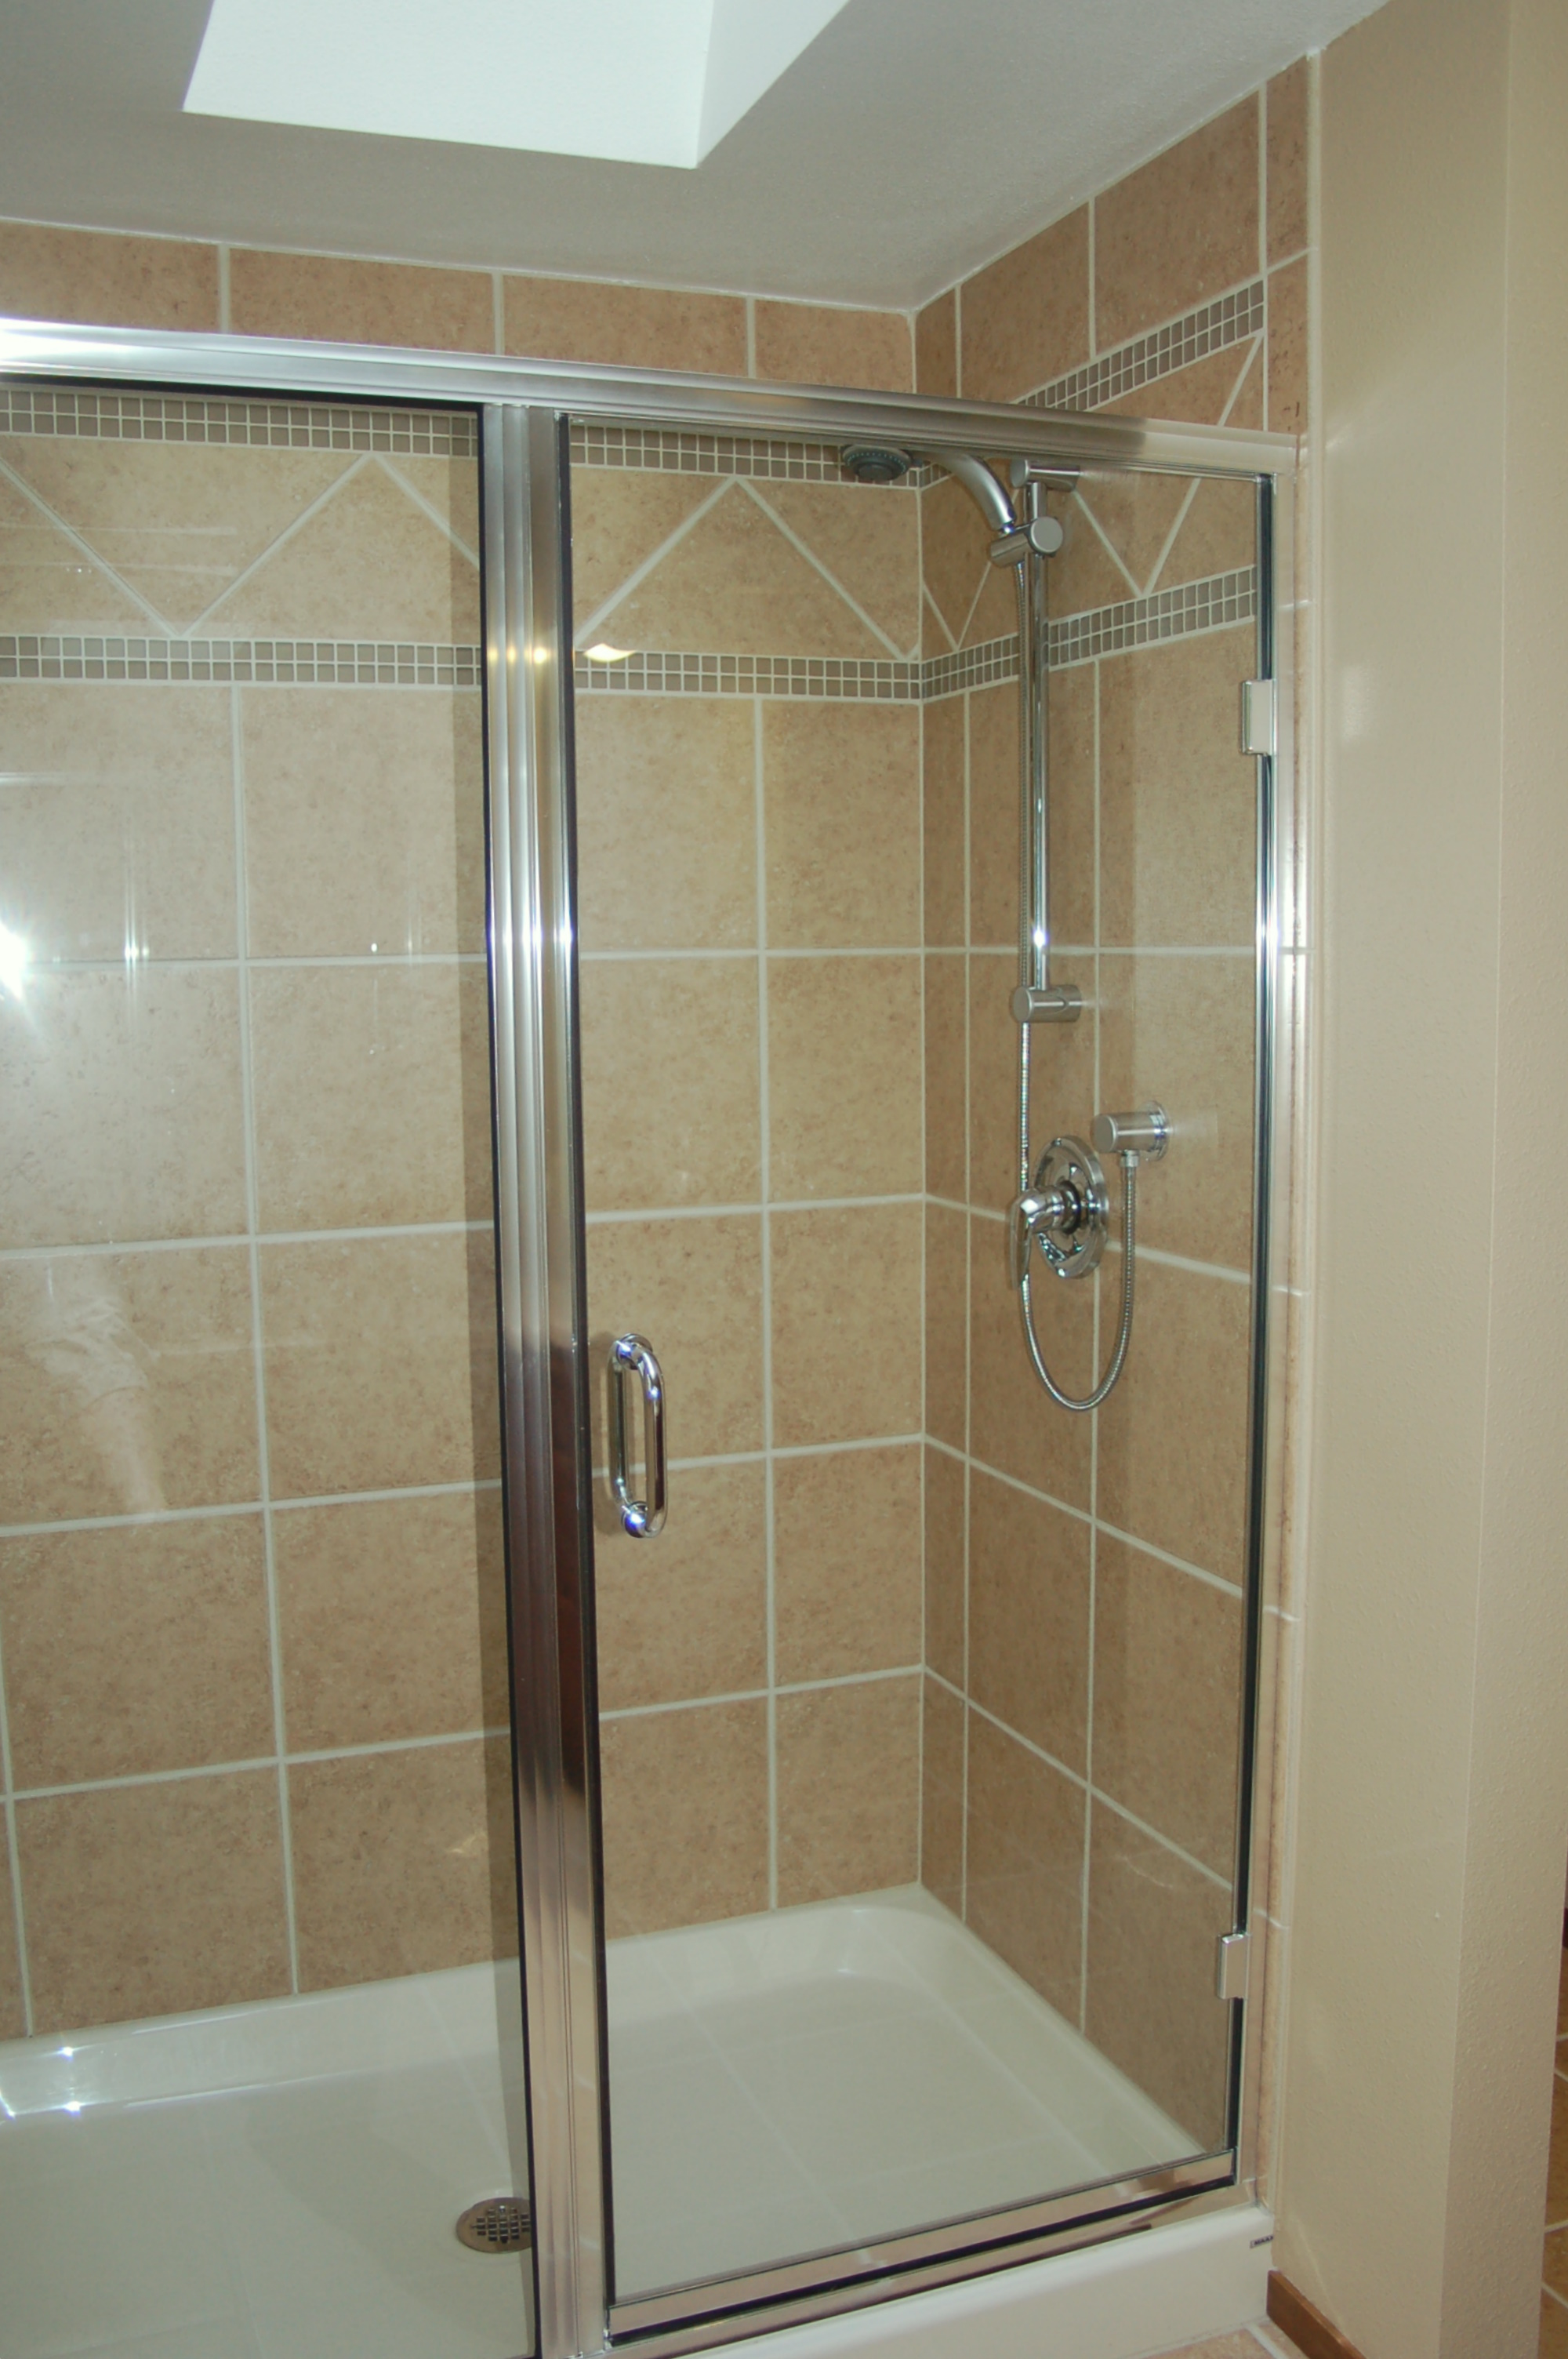 Great new tile surround and glass shower doors.